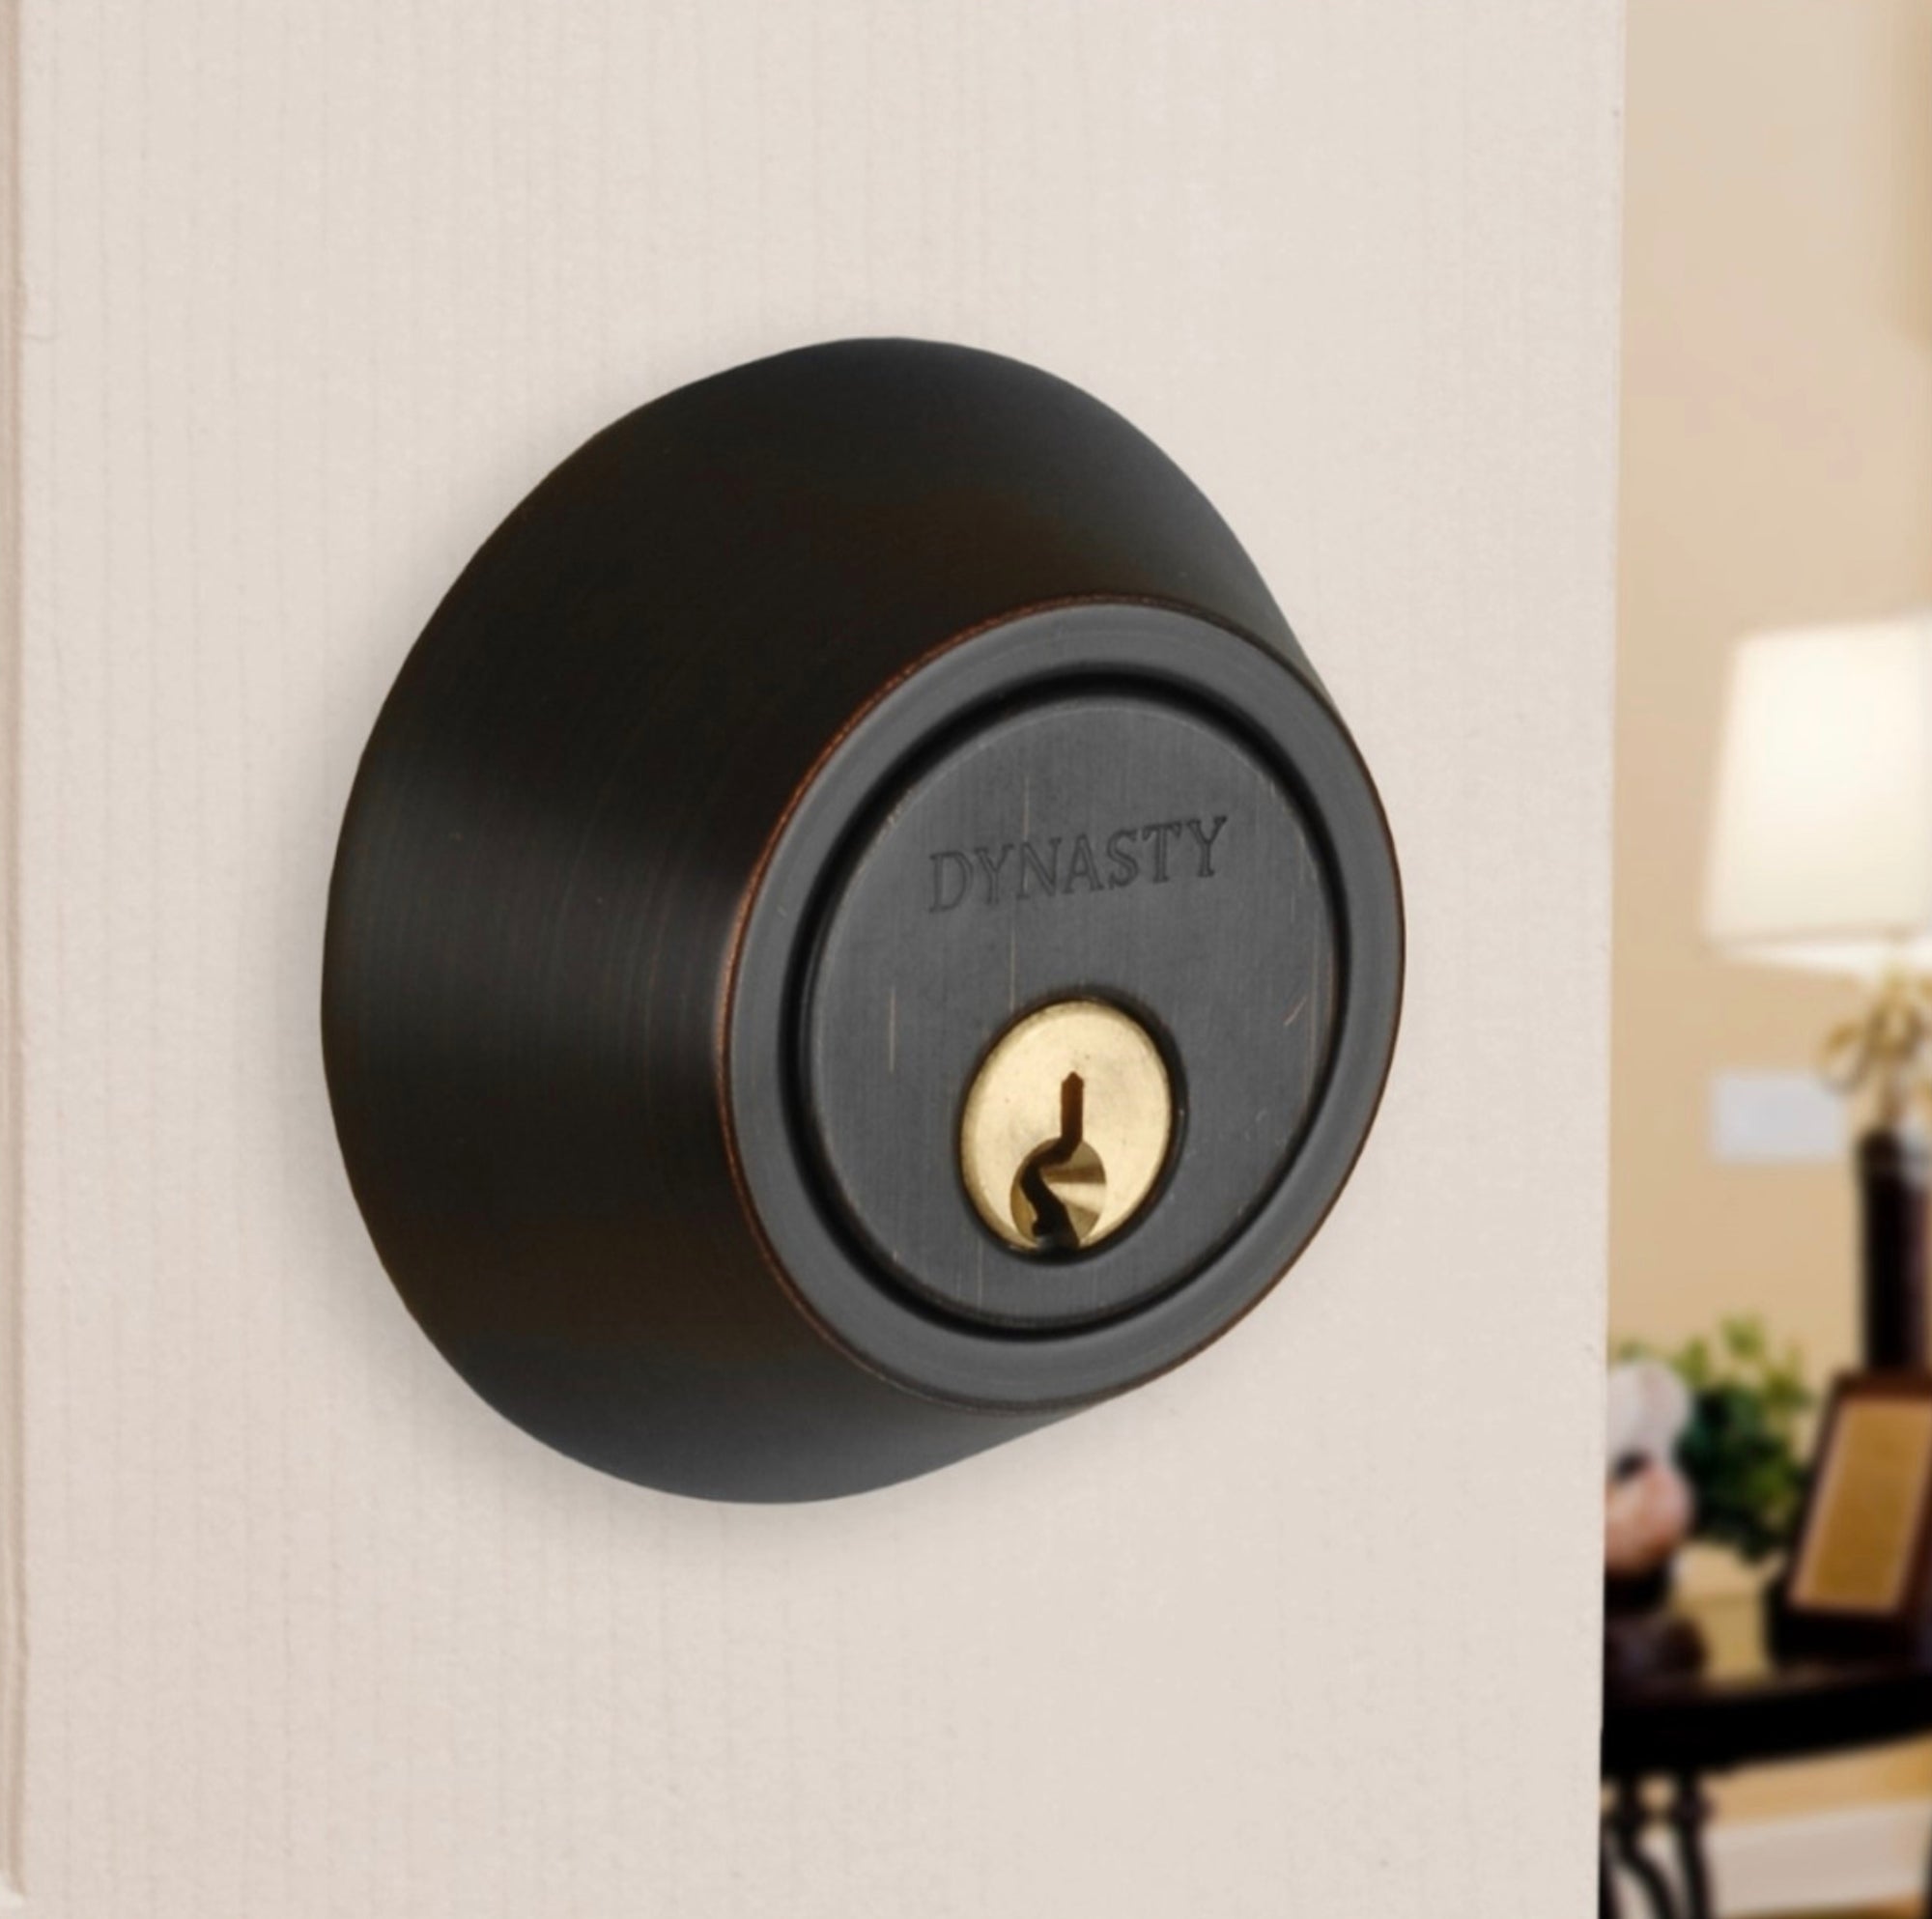 How to Choose Between a Single-Cylinder Deadbolt and a Double-Cylinder Deadbolt